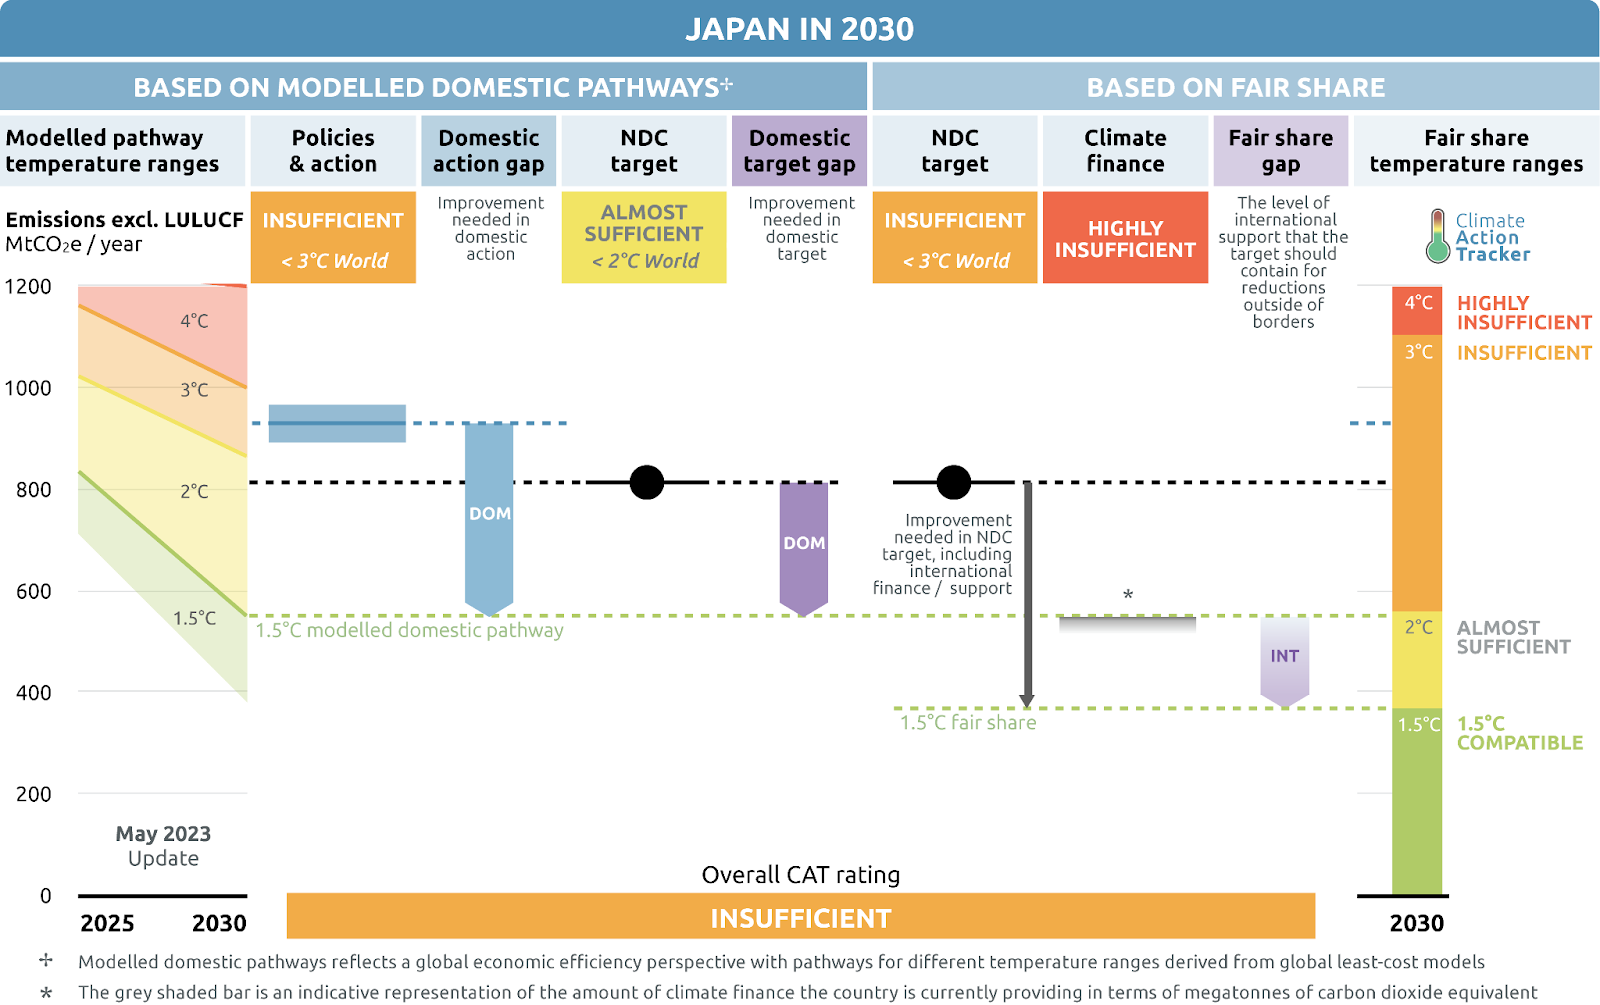 Japan Energy Policy Ratings, Source: Climate Action Tracker